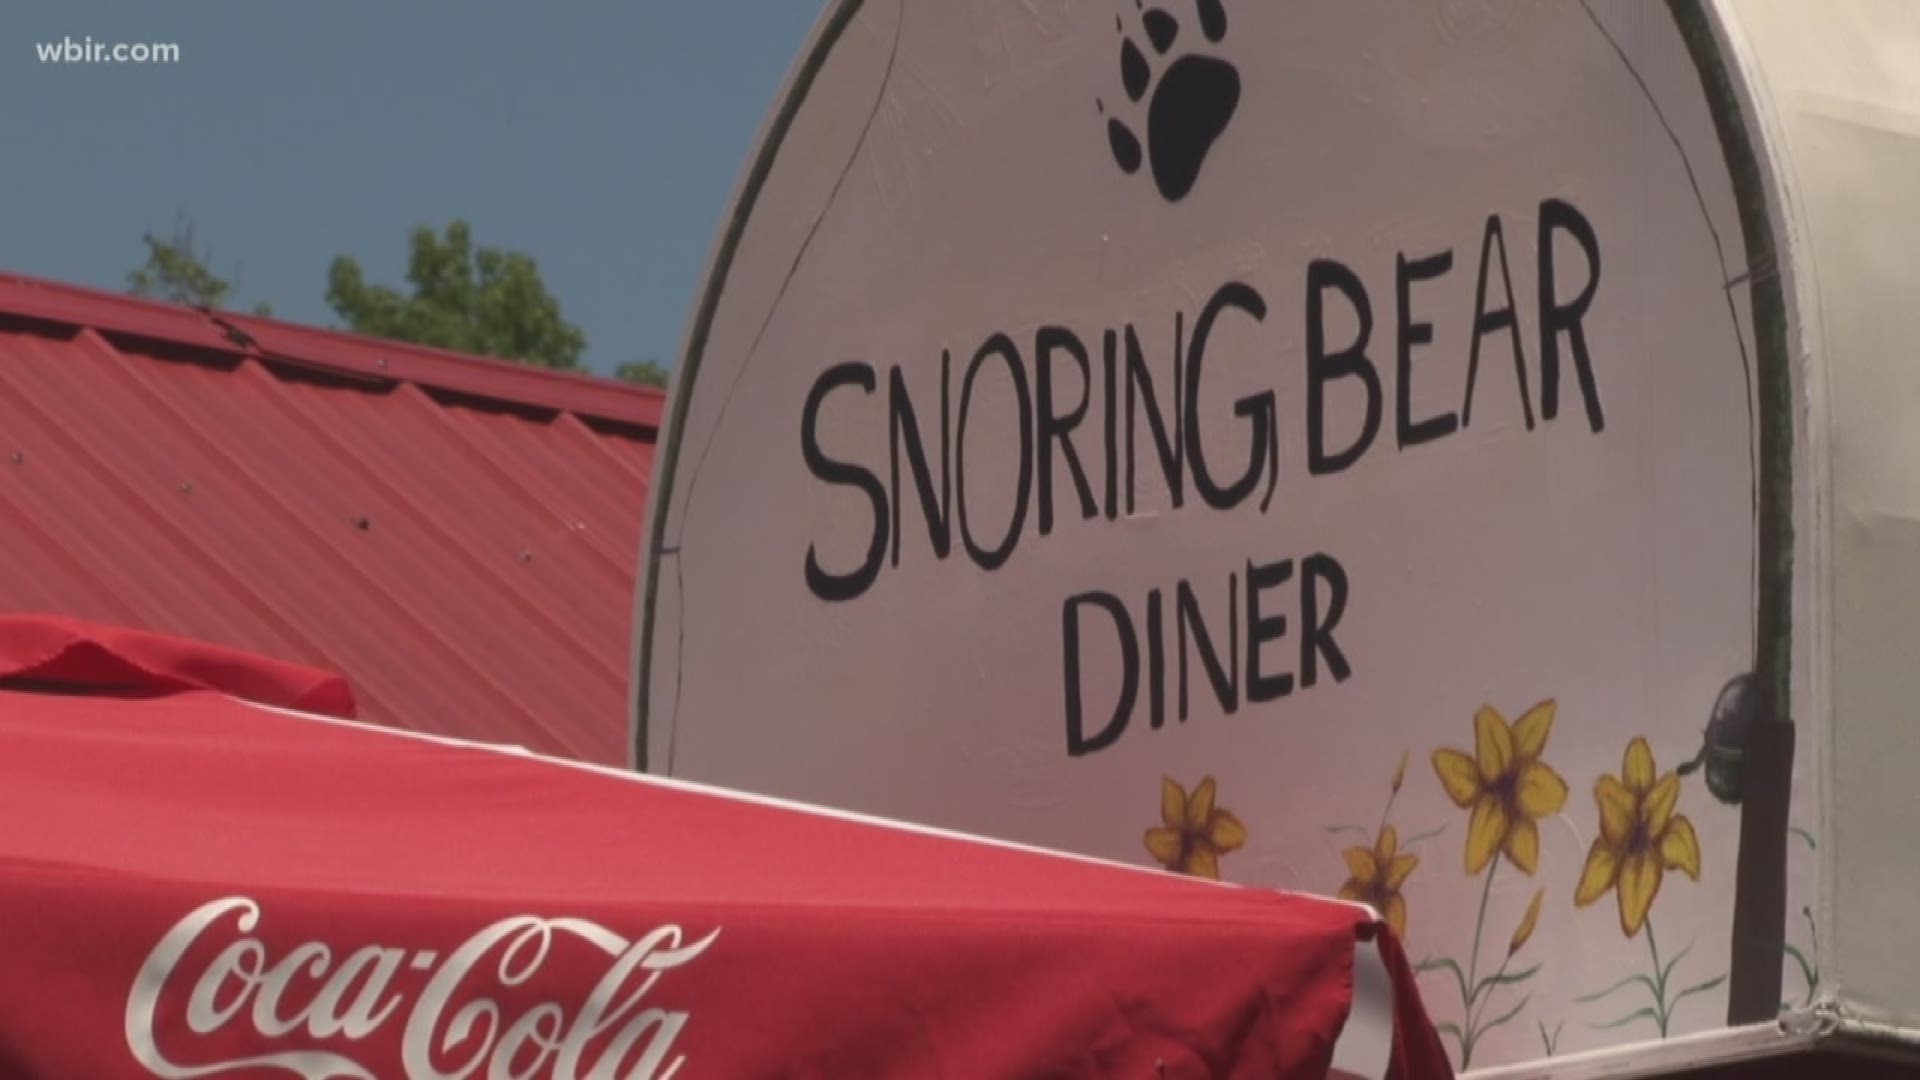 After losing nearly everything, a couple moved from Michigan to open their dream diner in Walland.